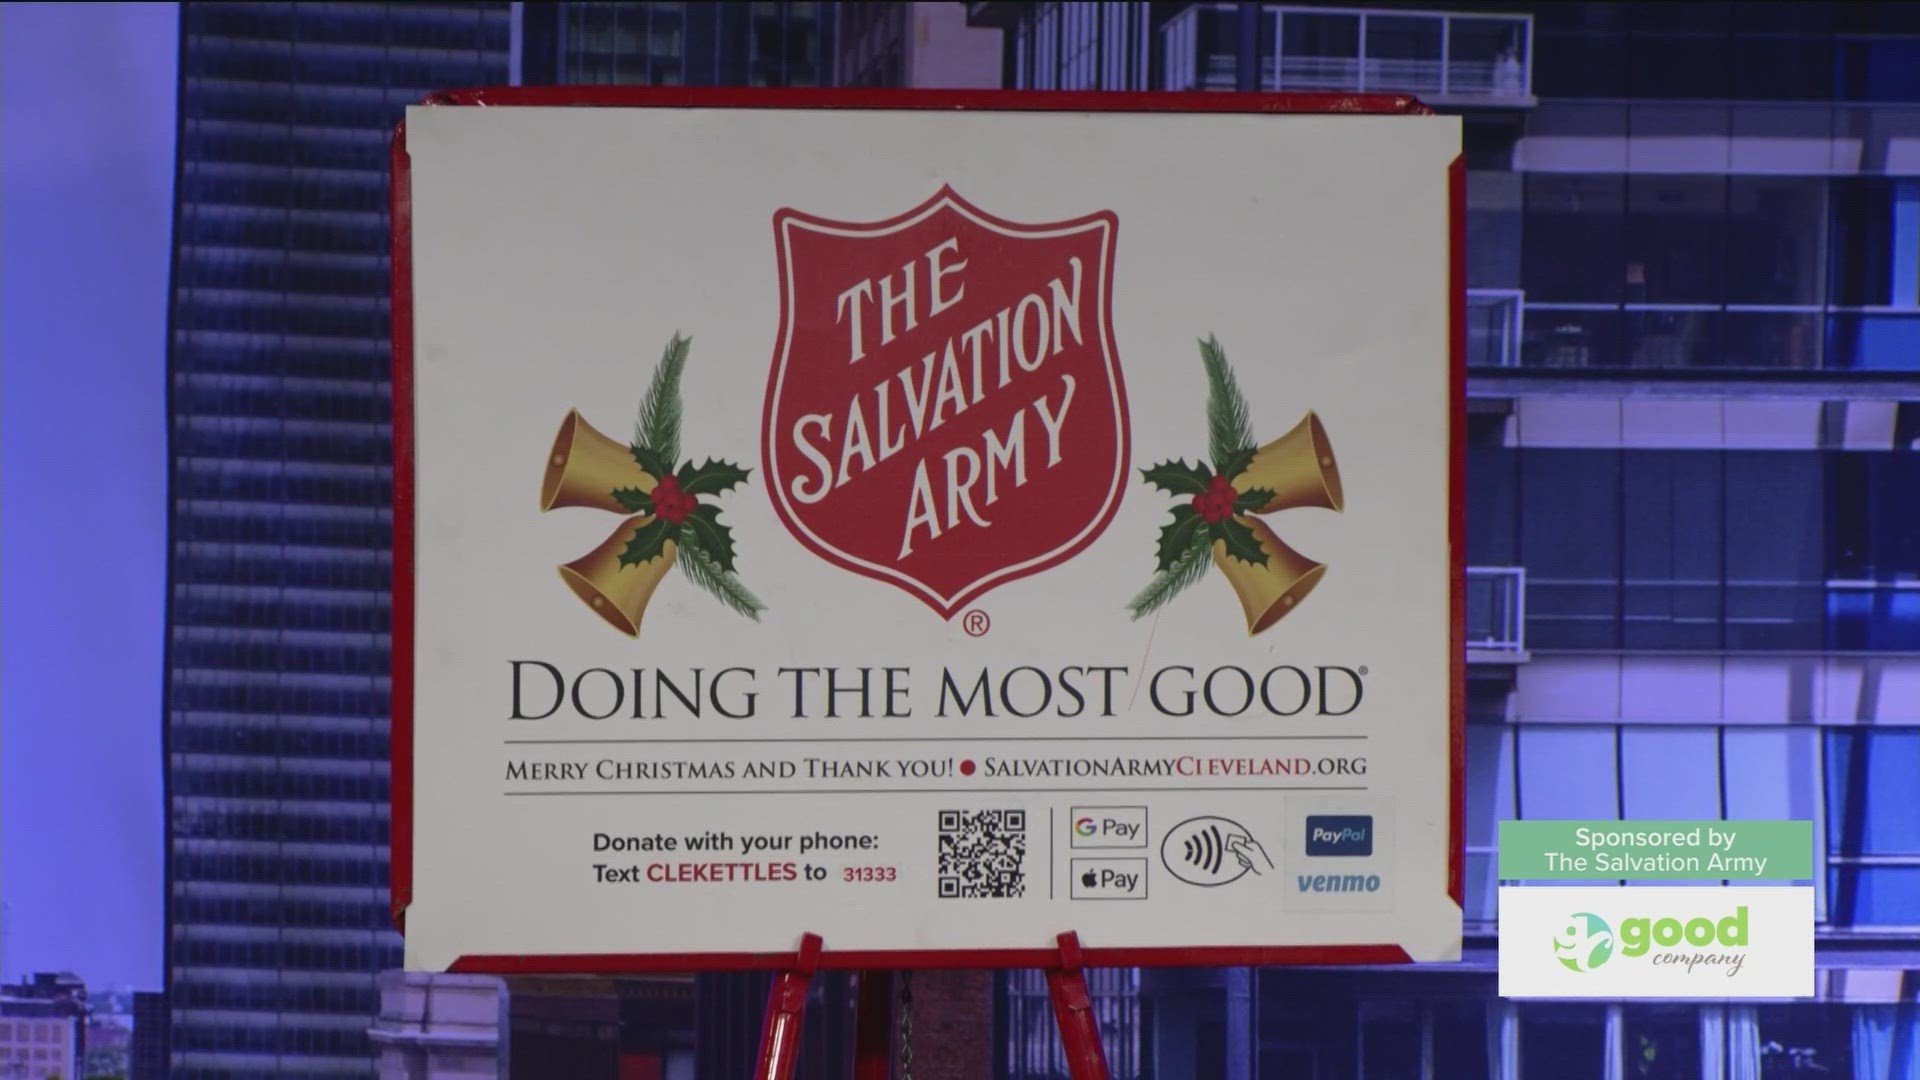 Joe and Terry talk with Captains Joel and Kathleen Ashcraft about the needs for donations in the area. Sponsored by: The Salvation Army